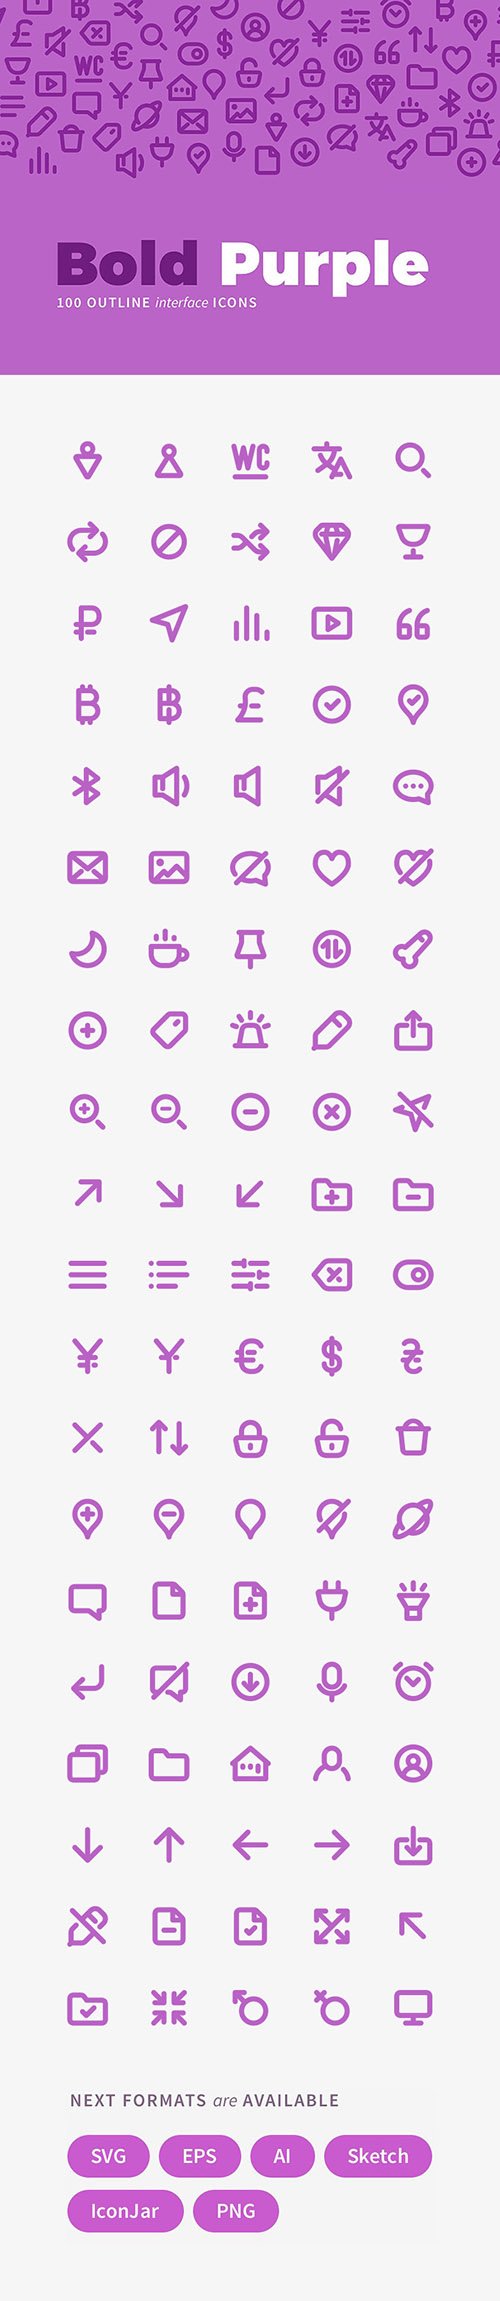 AI, EPS, PNG, SVG Vector Web Icons - Bold Purple